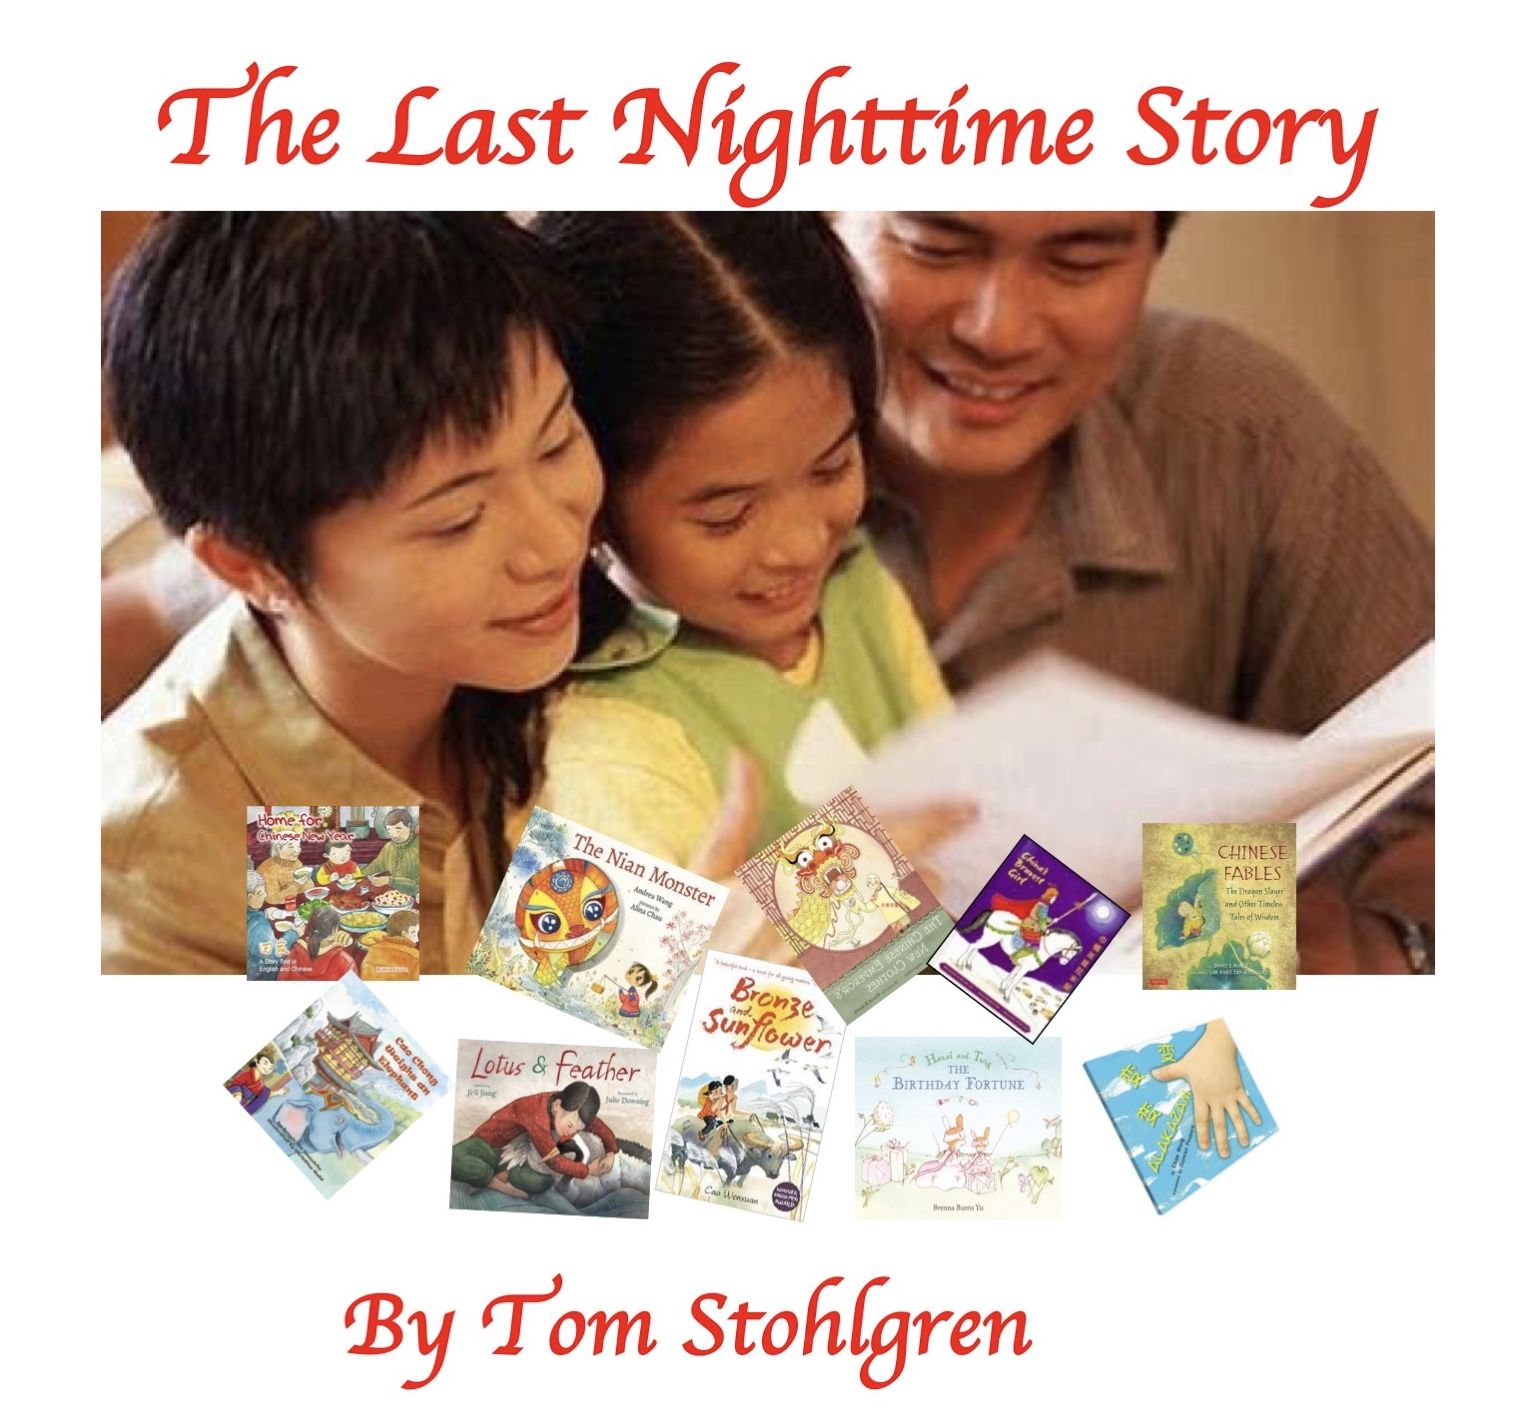 THE LAST NIGHTTIME STORY (SET IN CHINA)